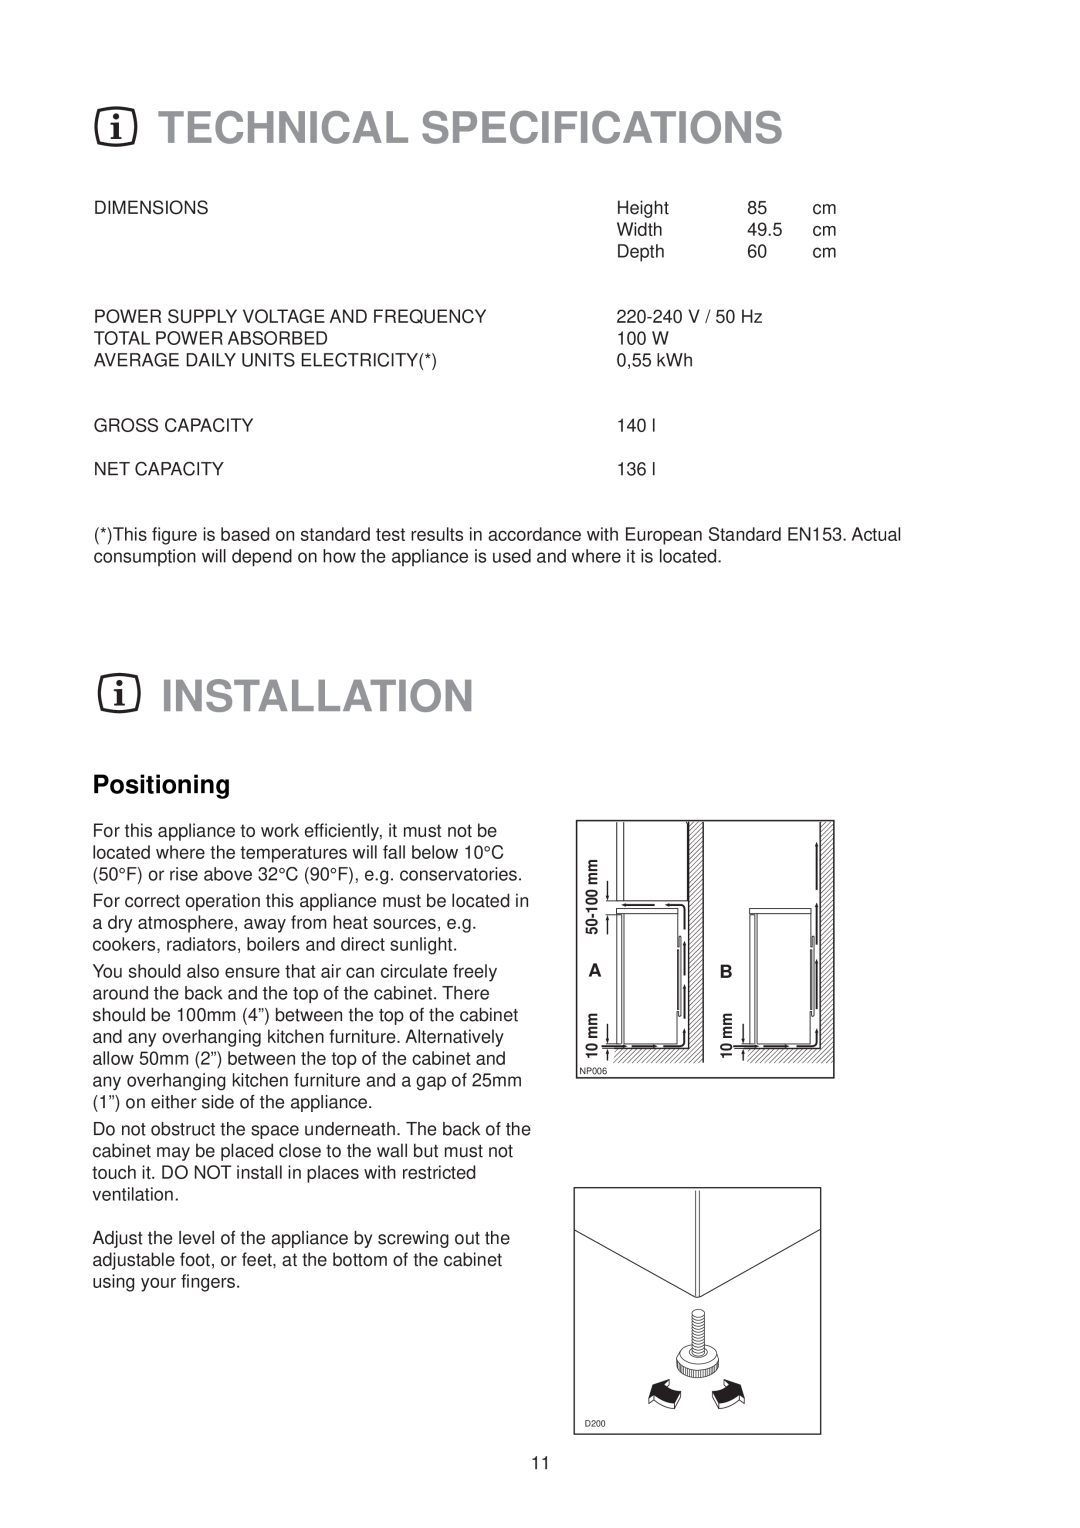 Zanussi CL 50 SI manual Technical Specifications, Installation, Positioning 